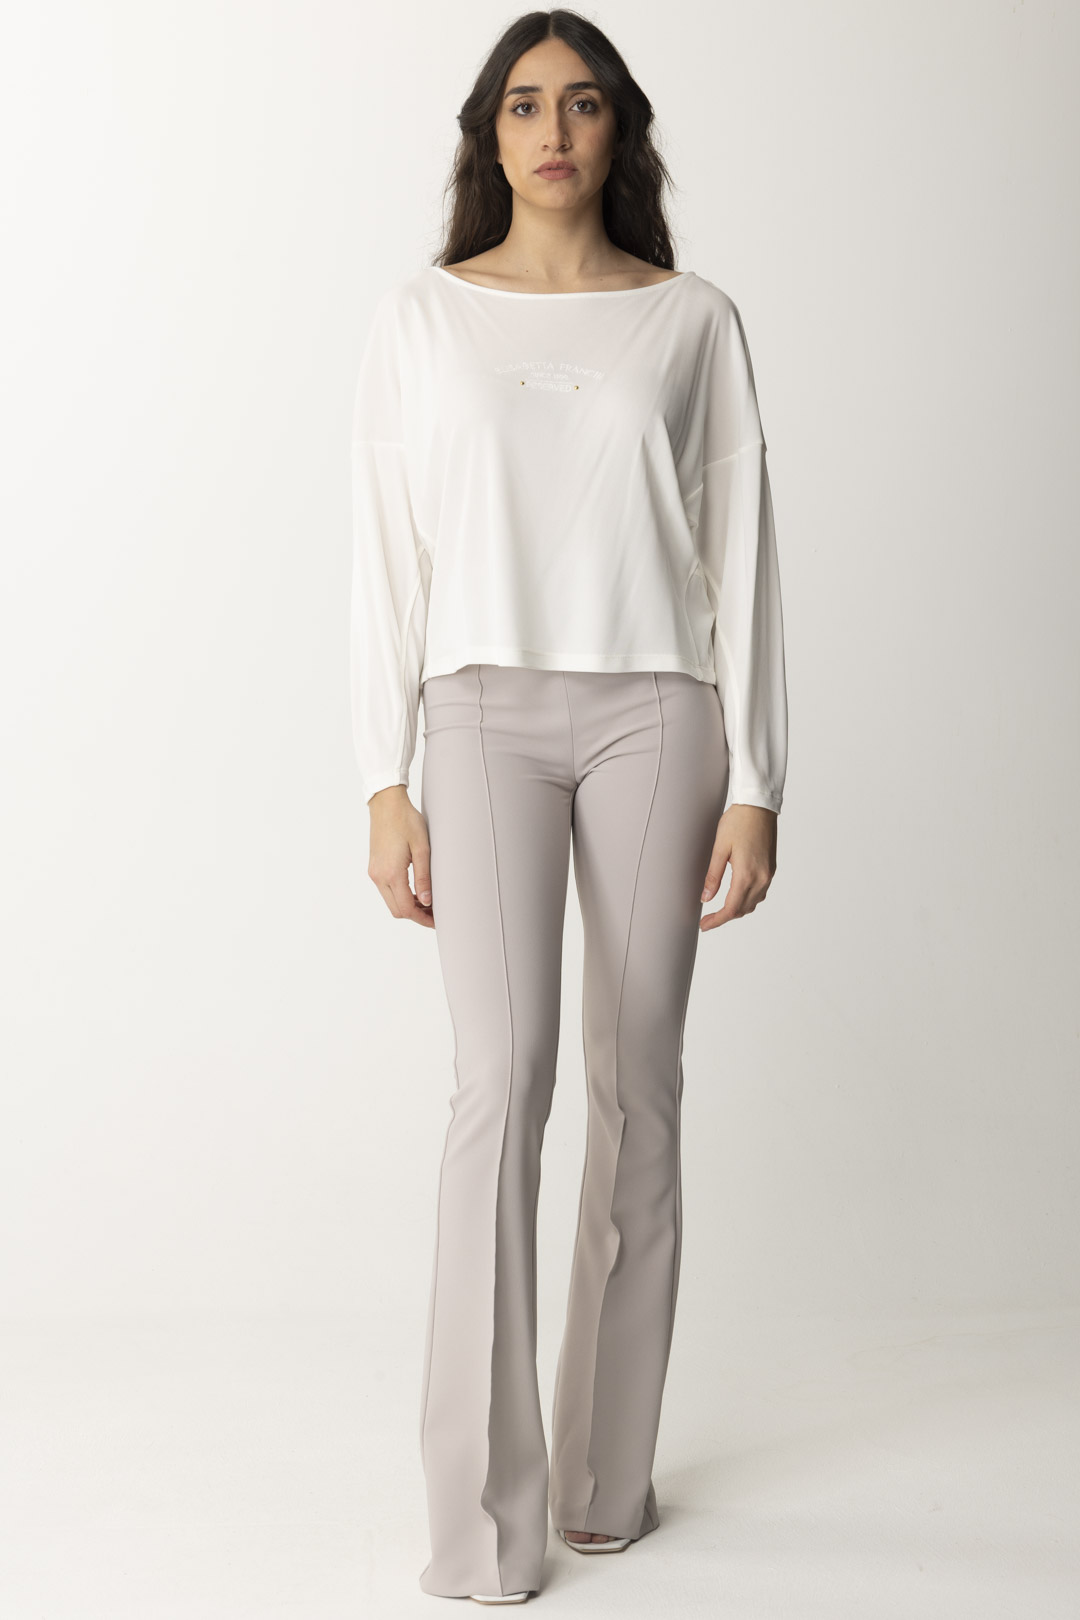 Preview: Elisabetta Franchi Tonal Embroidered Reserved Sweater Avorio